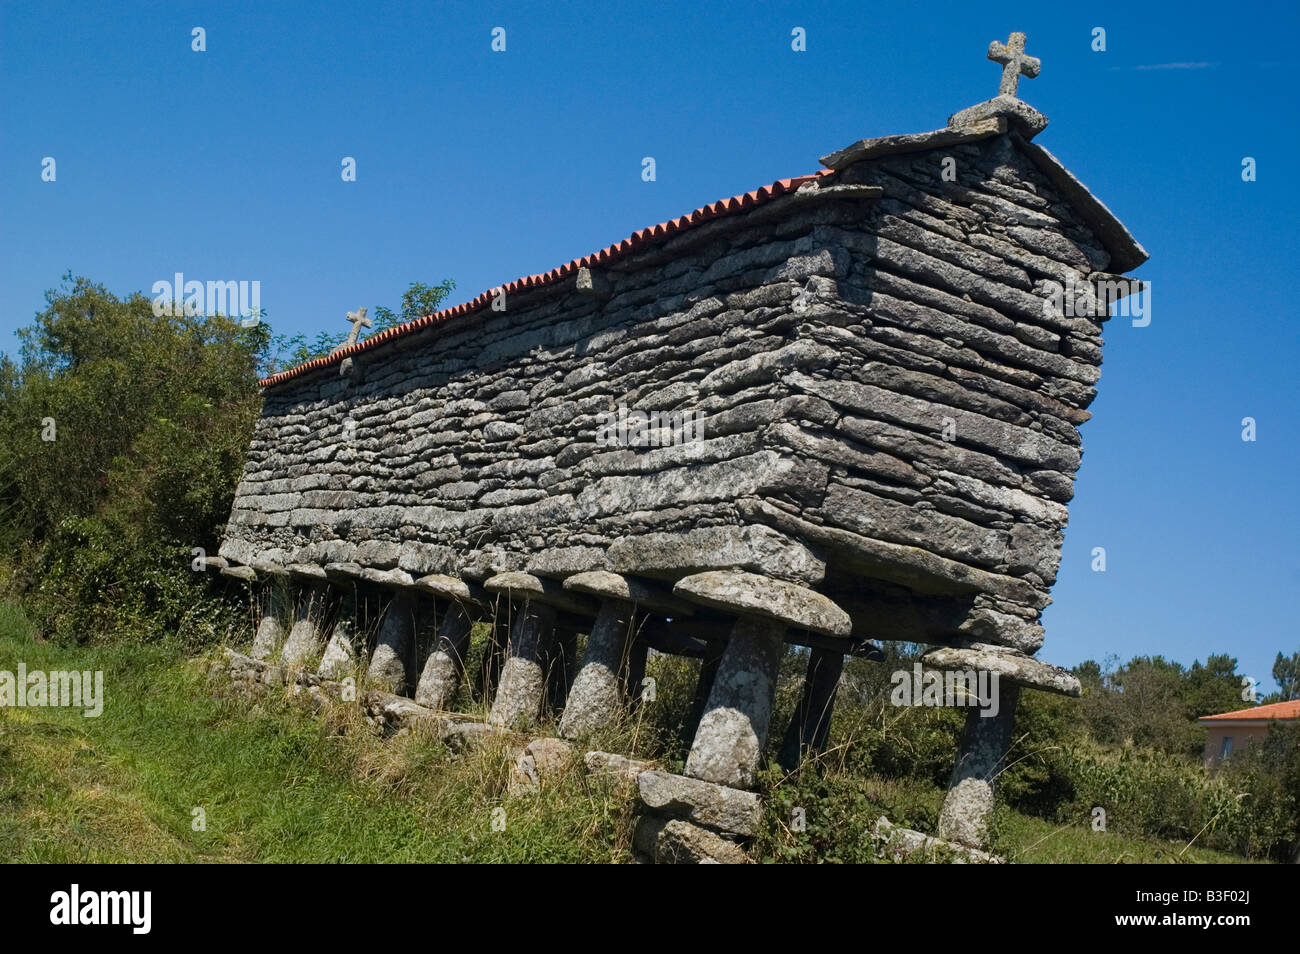 Typical granary called horreo in the village of Olveiroa WAY OF SAINT JAMES or CAMINO DE SANTIAGO in Galicia Spain Stock Photo